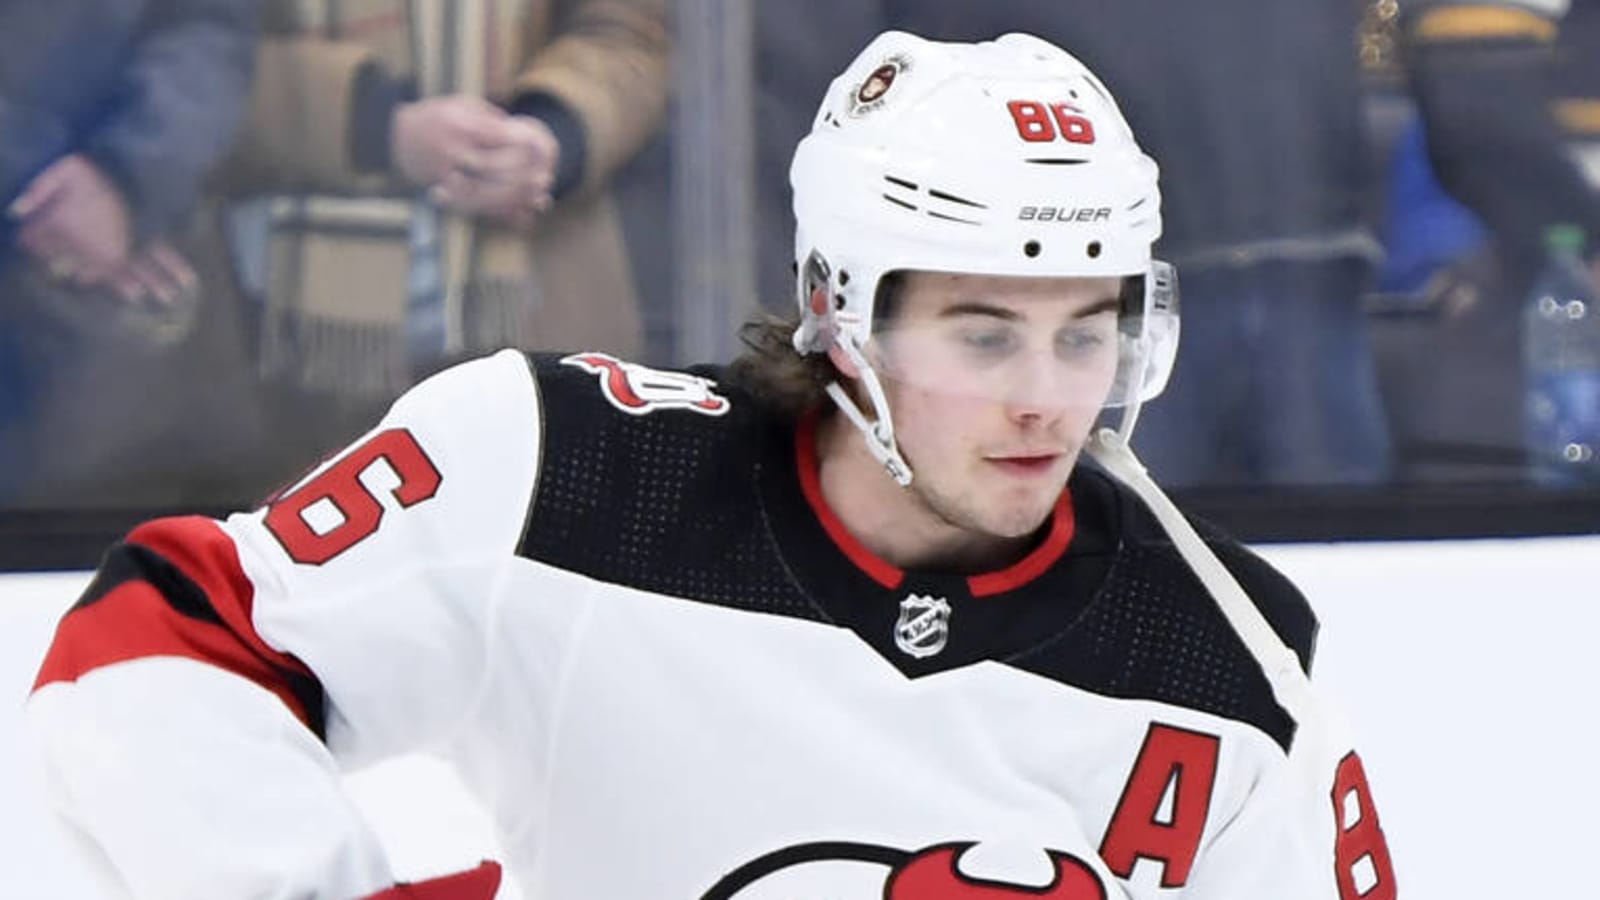 Hughes sets Devils single-season record with 97 points